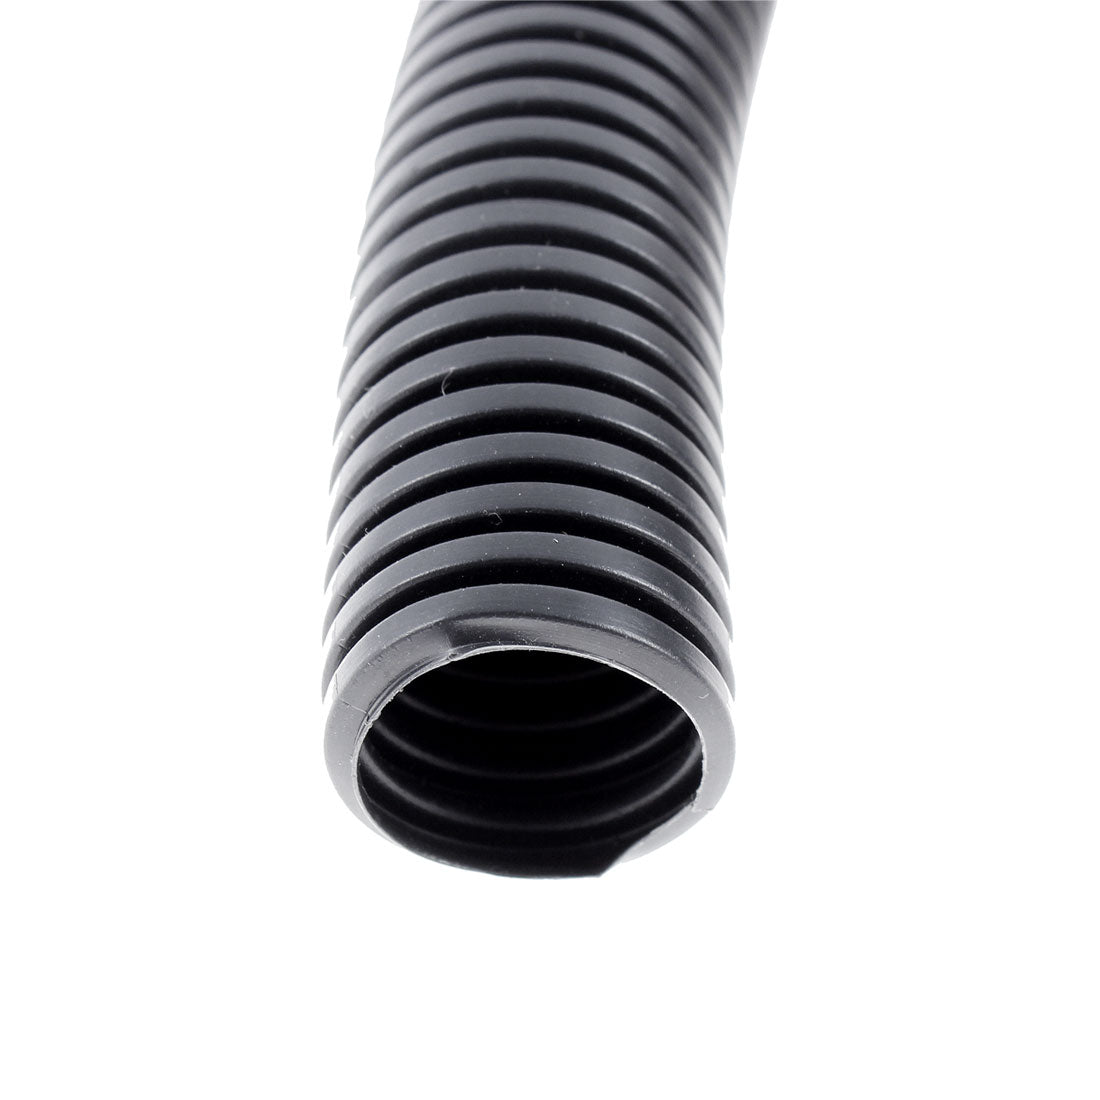 uxcell Uxcell 4.95 M 23 x 28.5 mm Plastic Corrugated Conduit Tube for Garden,Office Black